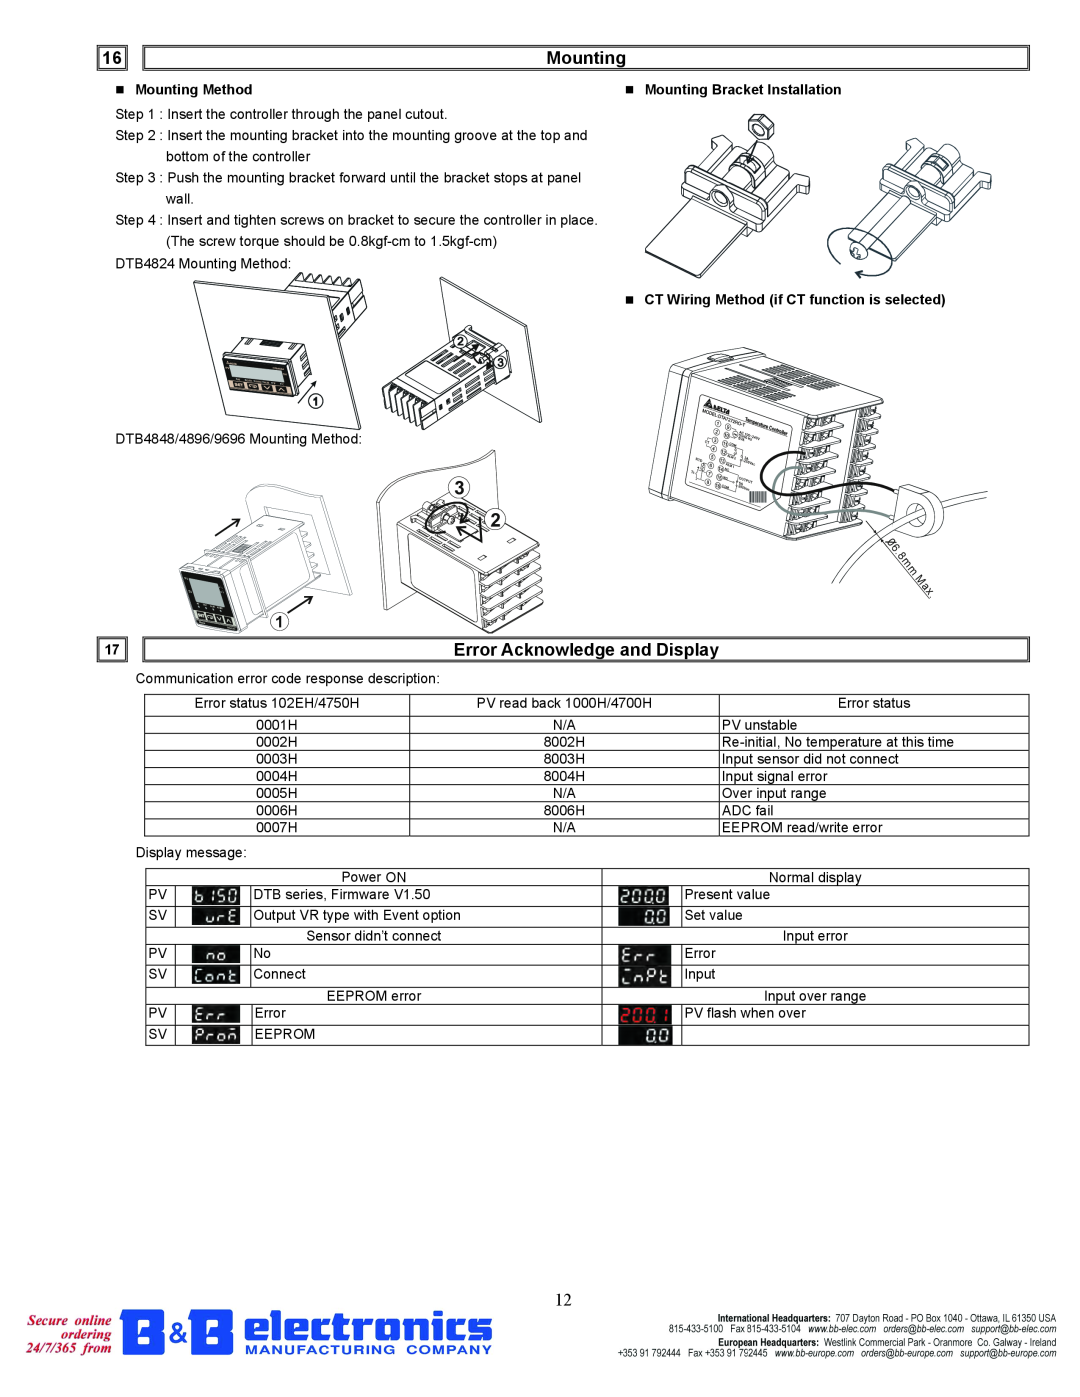 B&B Electronics DTB Series Error Acknowledge and Display, Mounting Method, CT Wiring Method if CT function is selected 